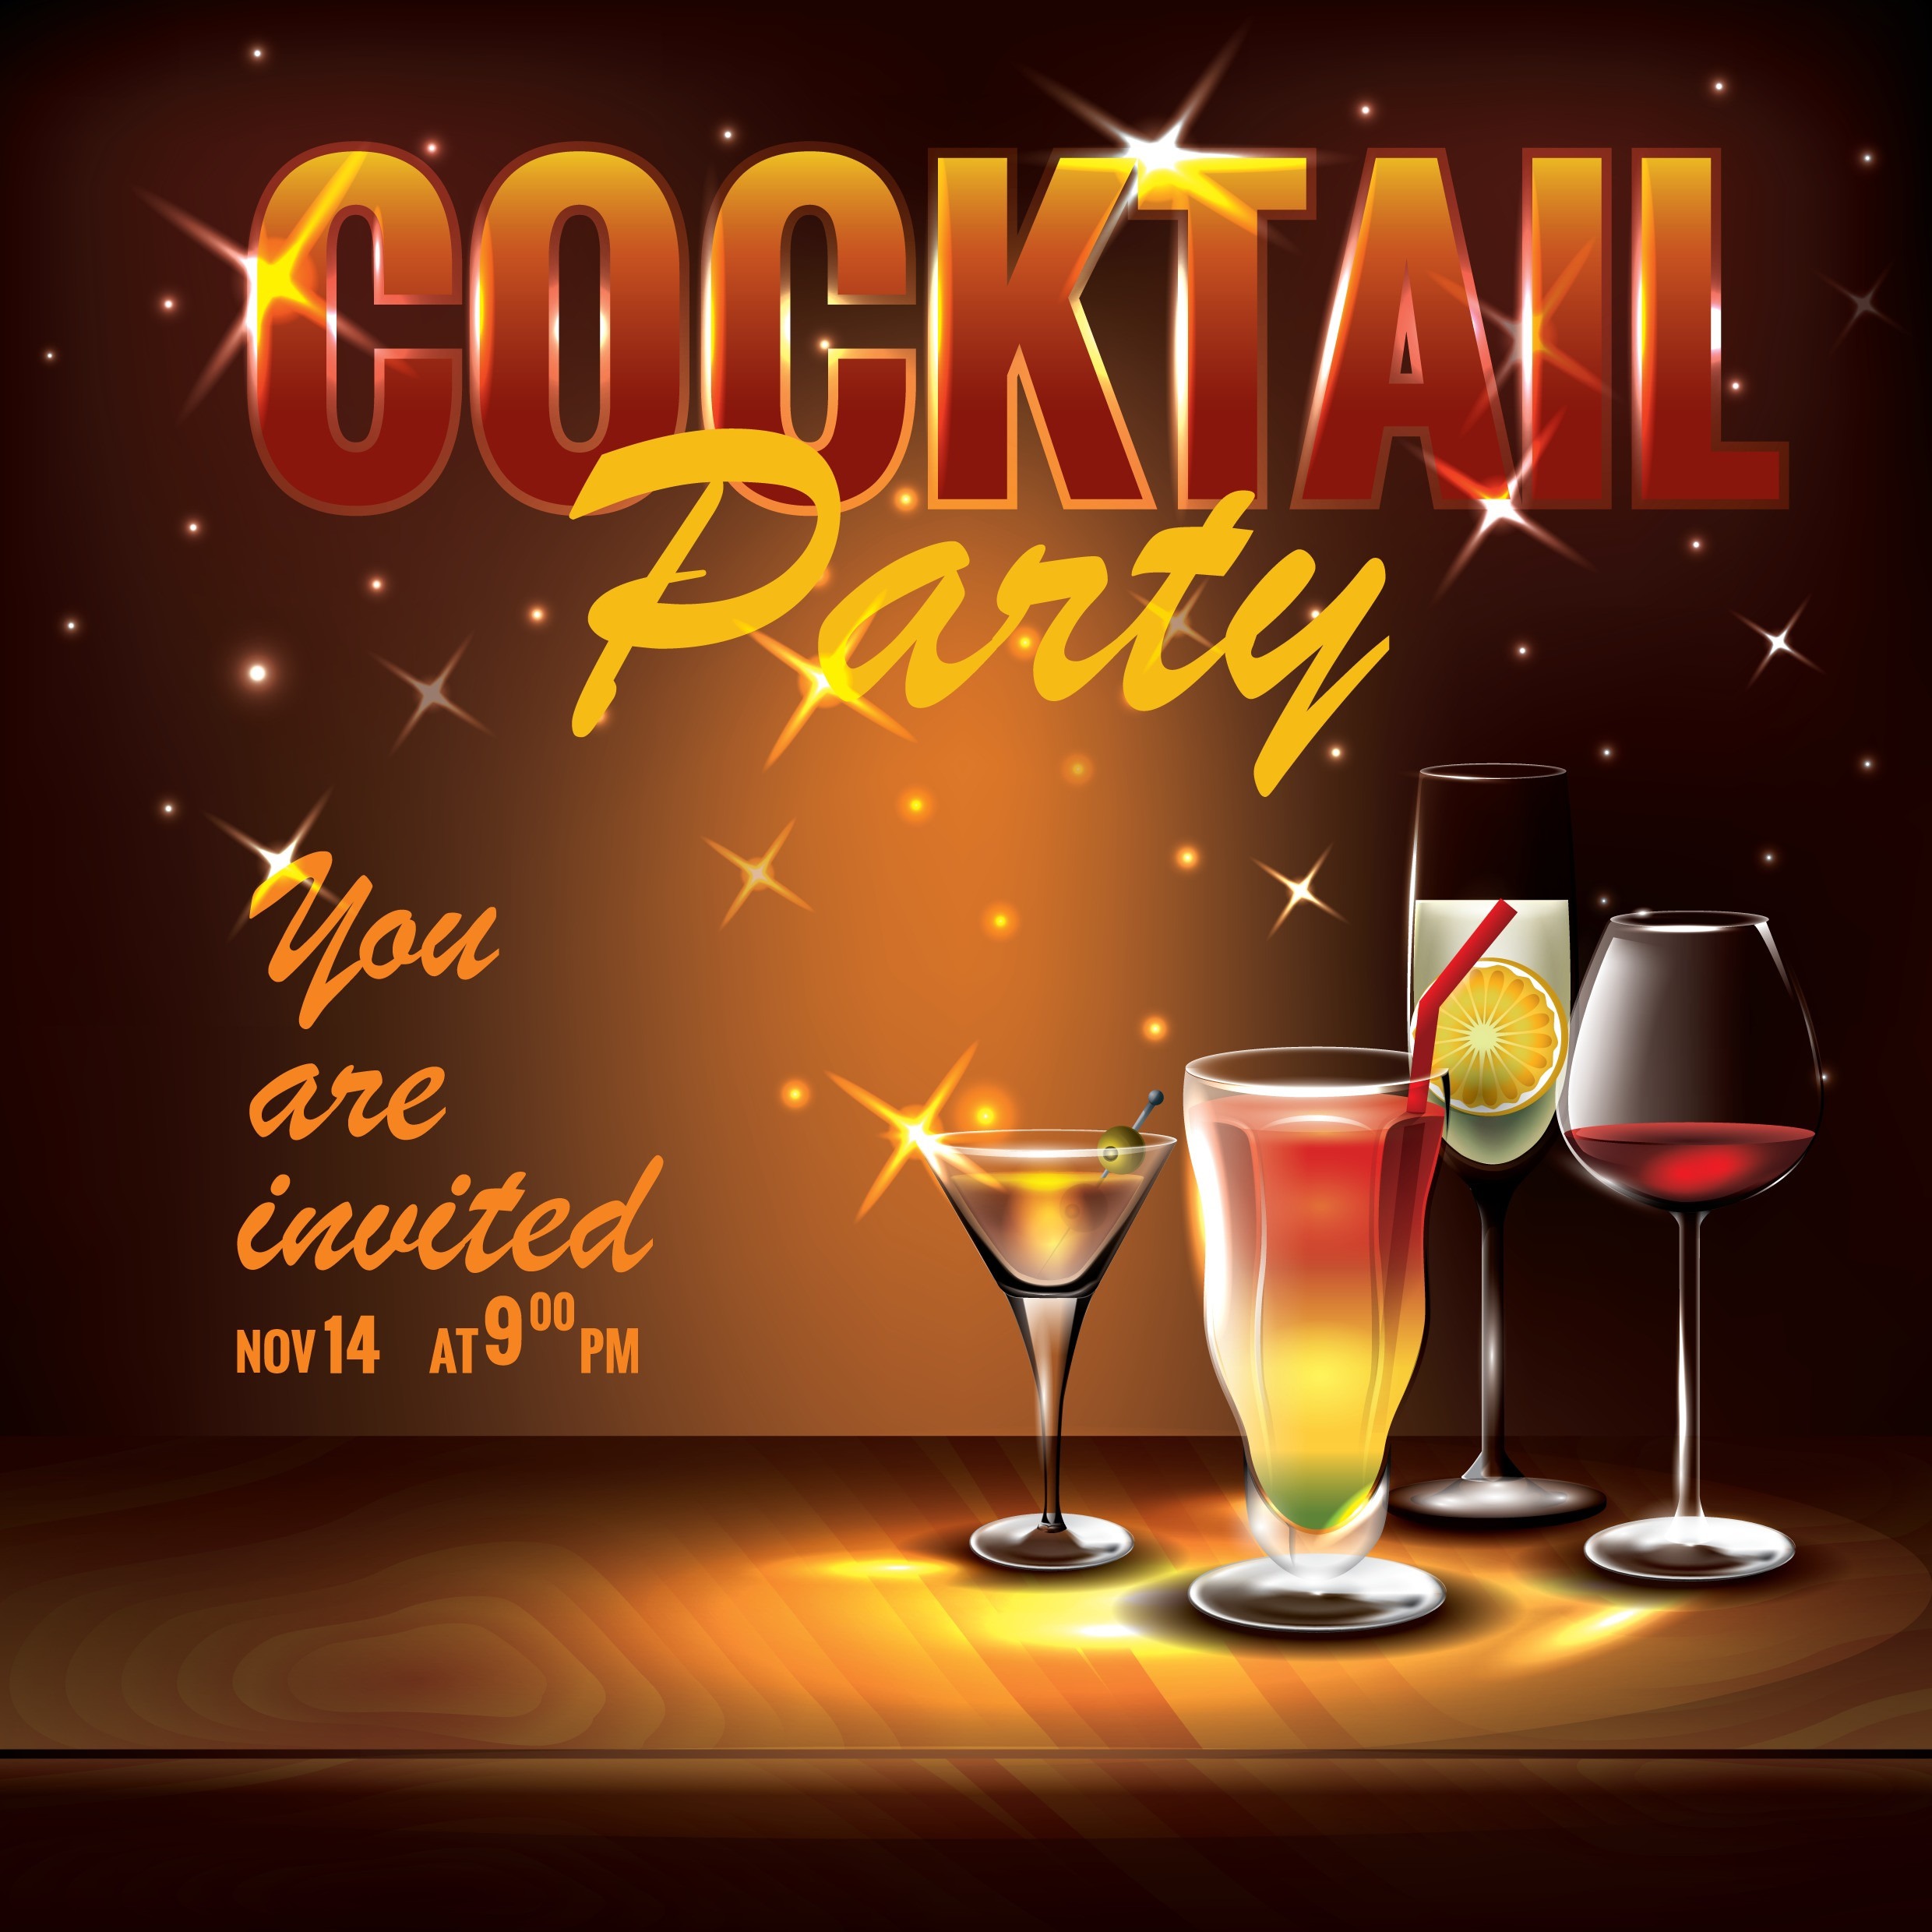 cocktail party invitation design. A source for canned cocktails.